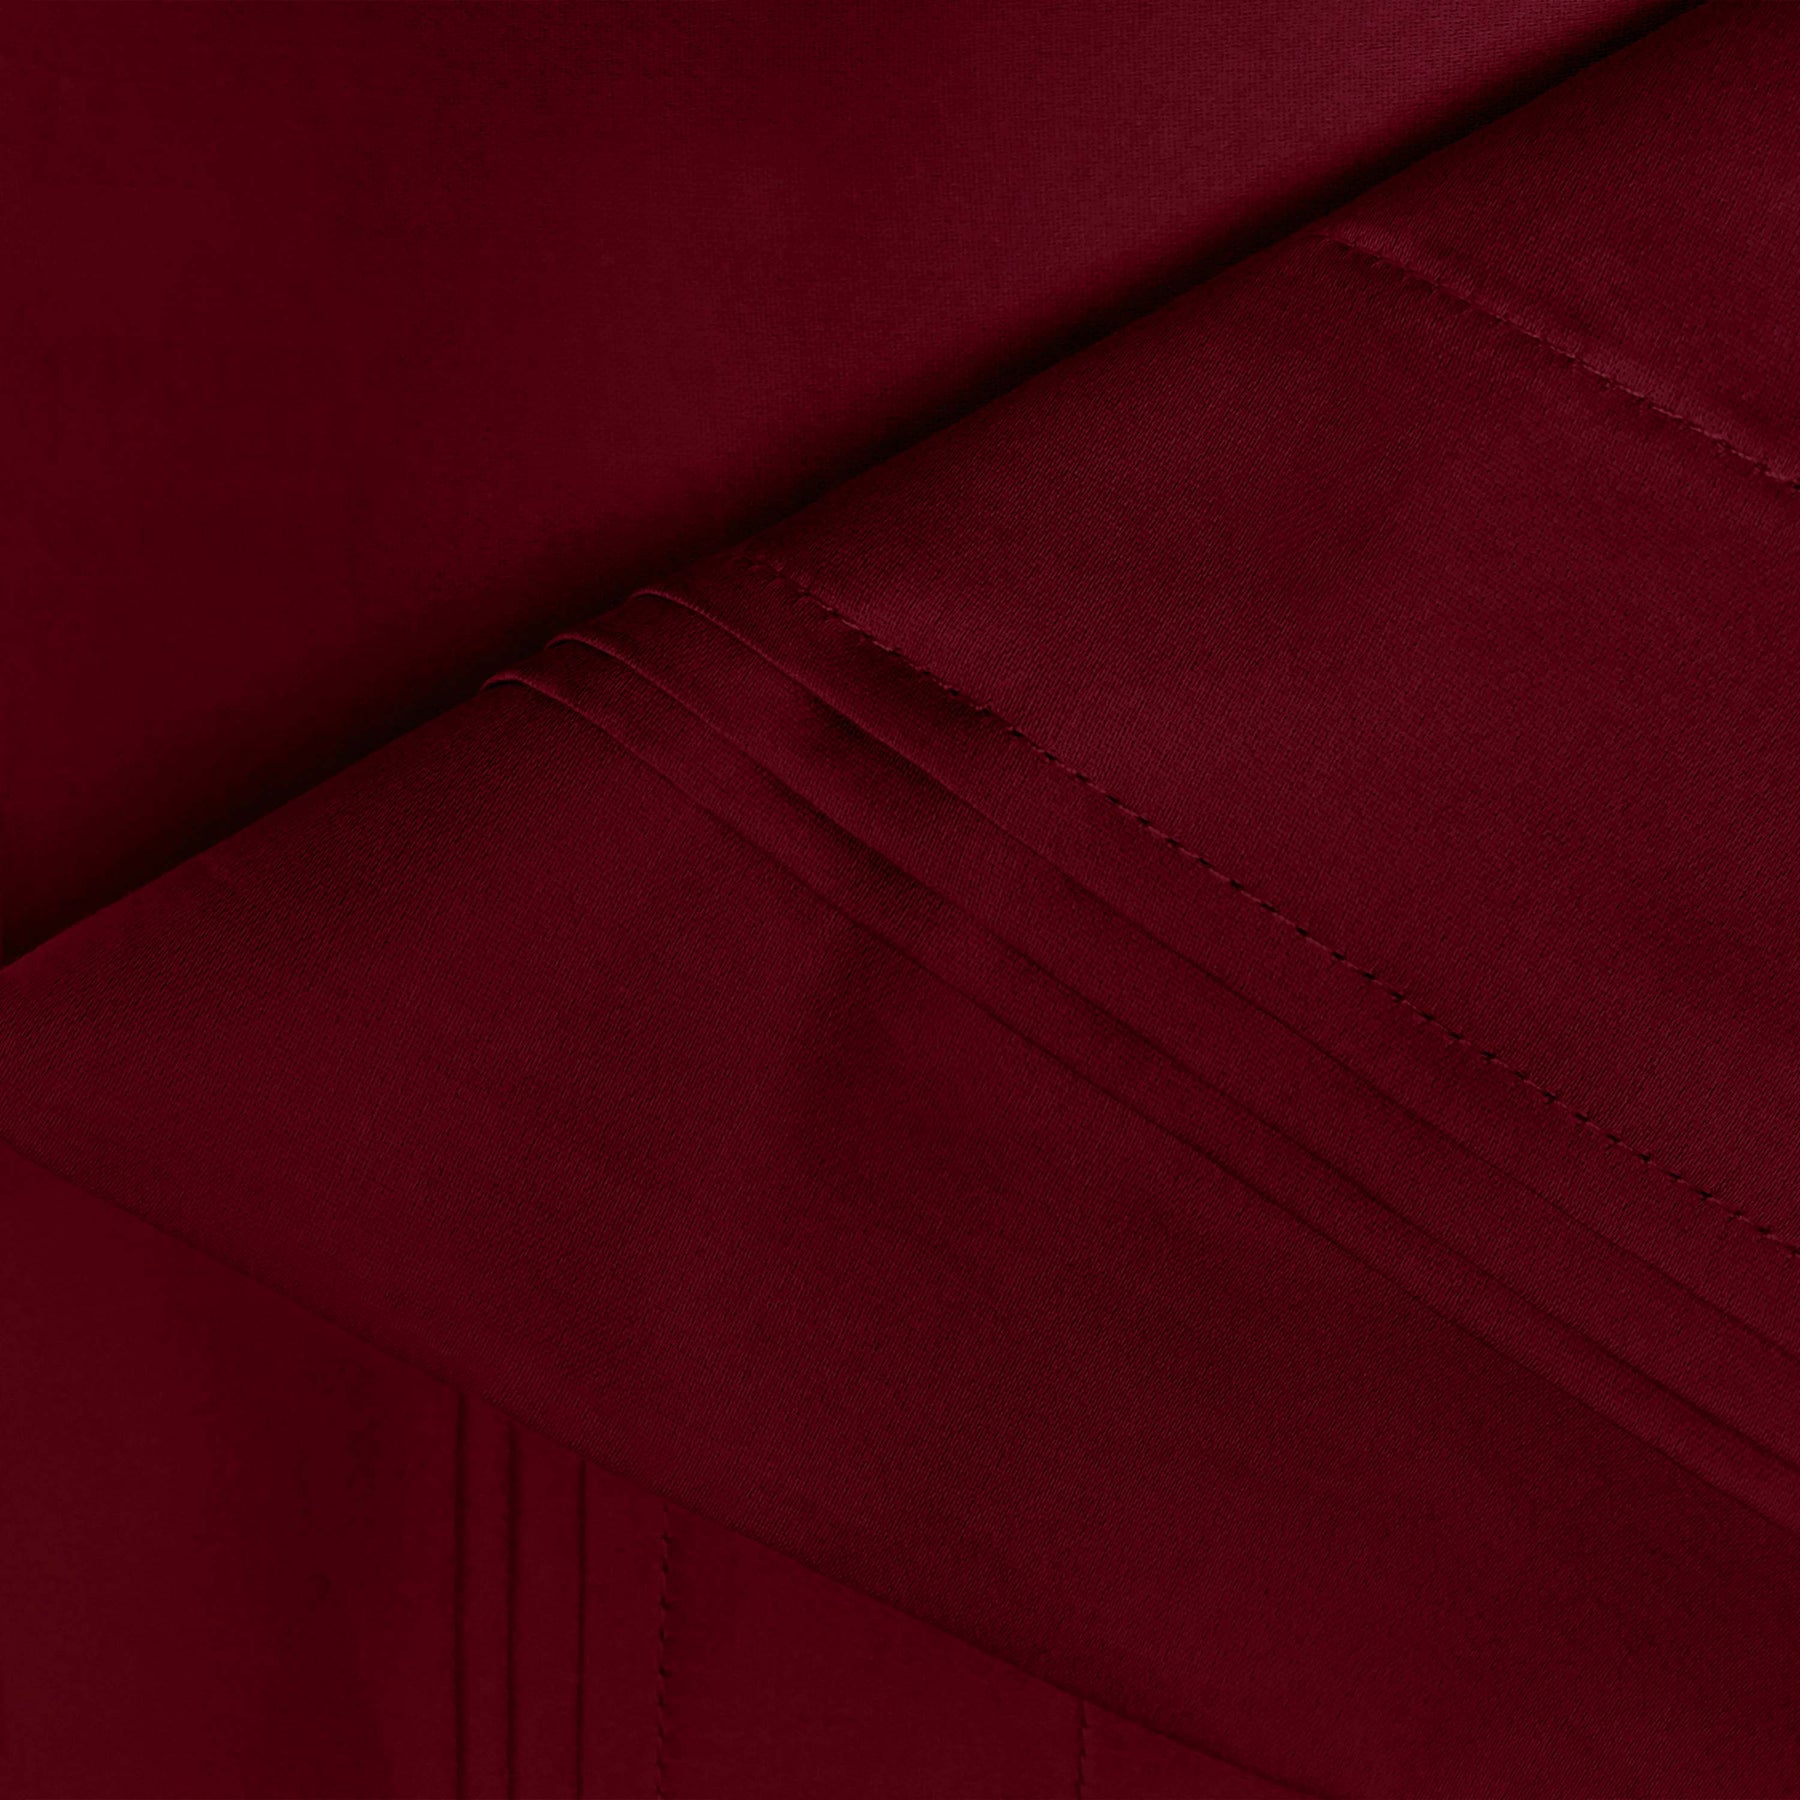 Egyptian Cotton 650 Thread Count Eco-Friendly Solid Sheet Set - Burgundy